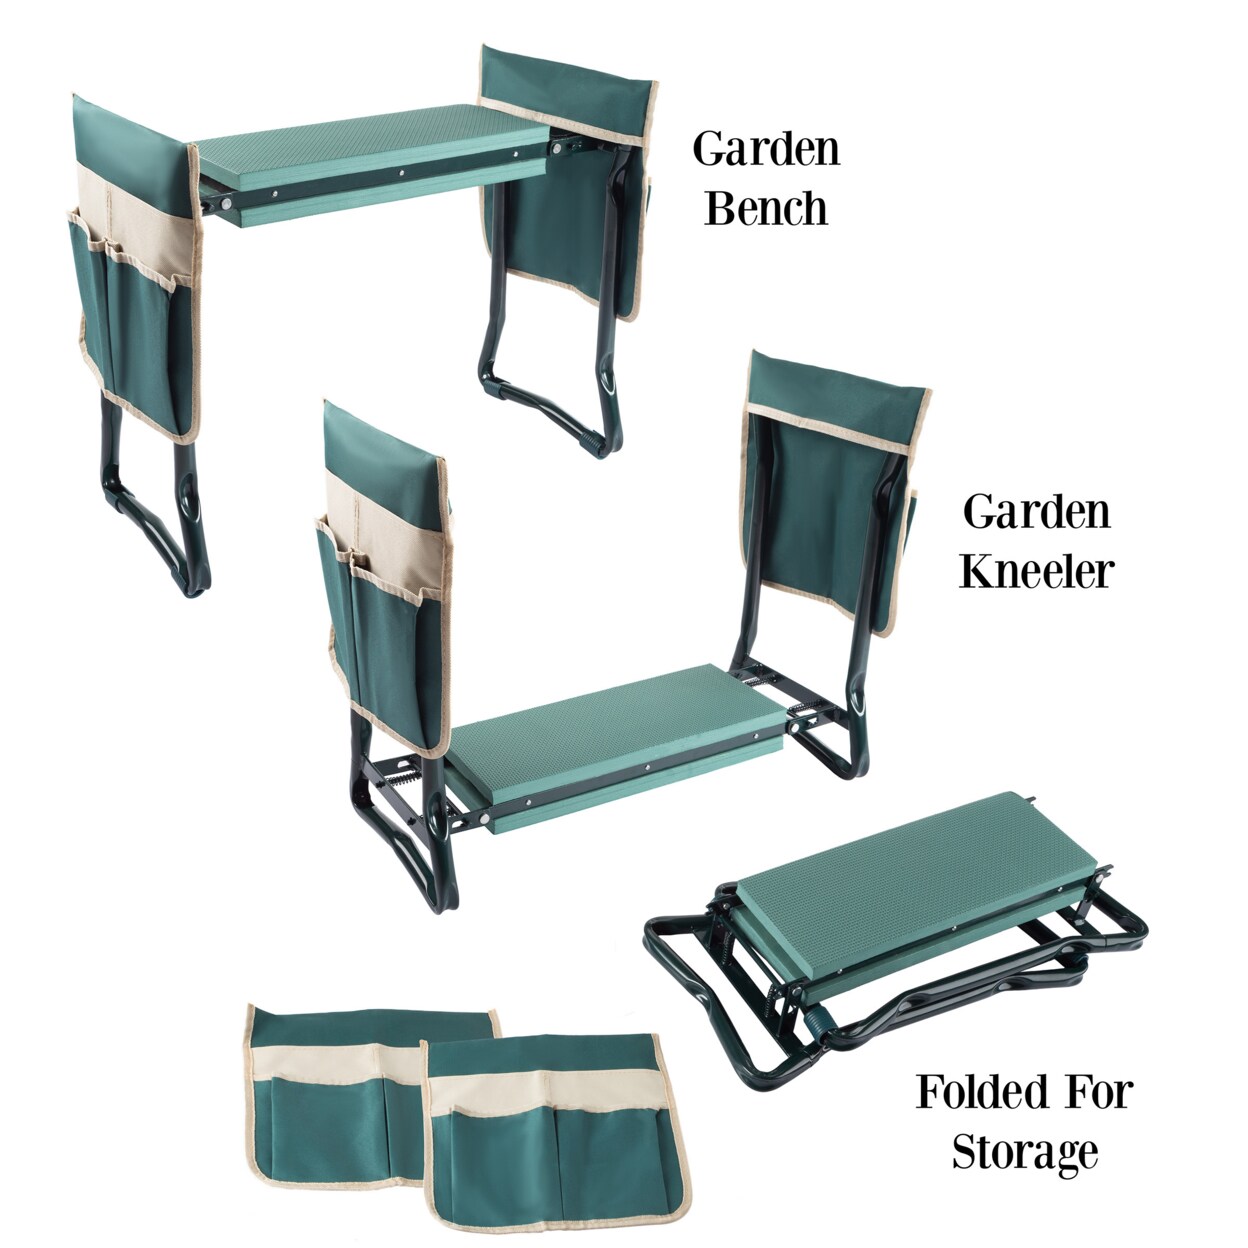 Pure Garden Gardening Kneeling Bench- Foldable Foam Pad Stool for Kneelers- 2 Tool Pouches and Handles Gardening Yardwork